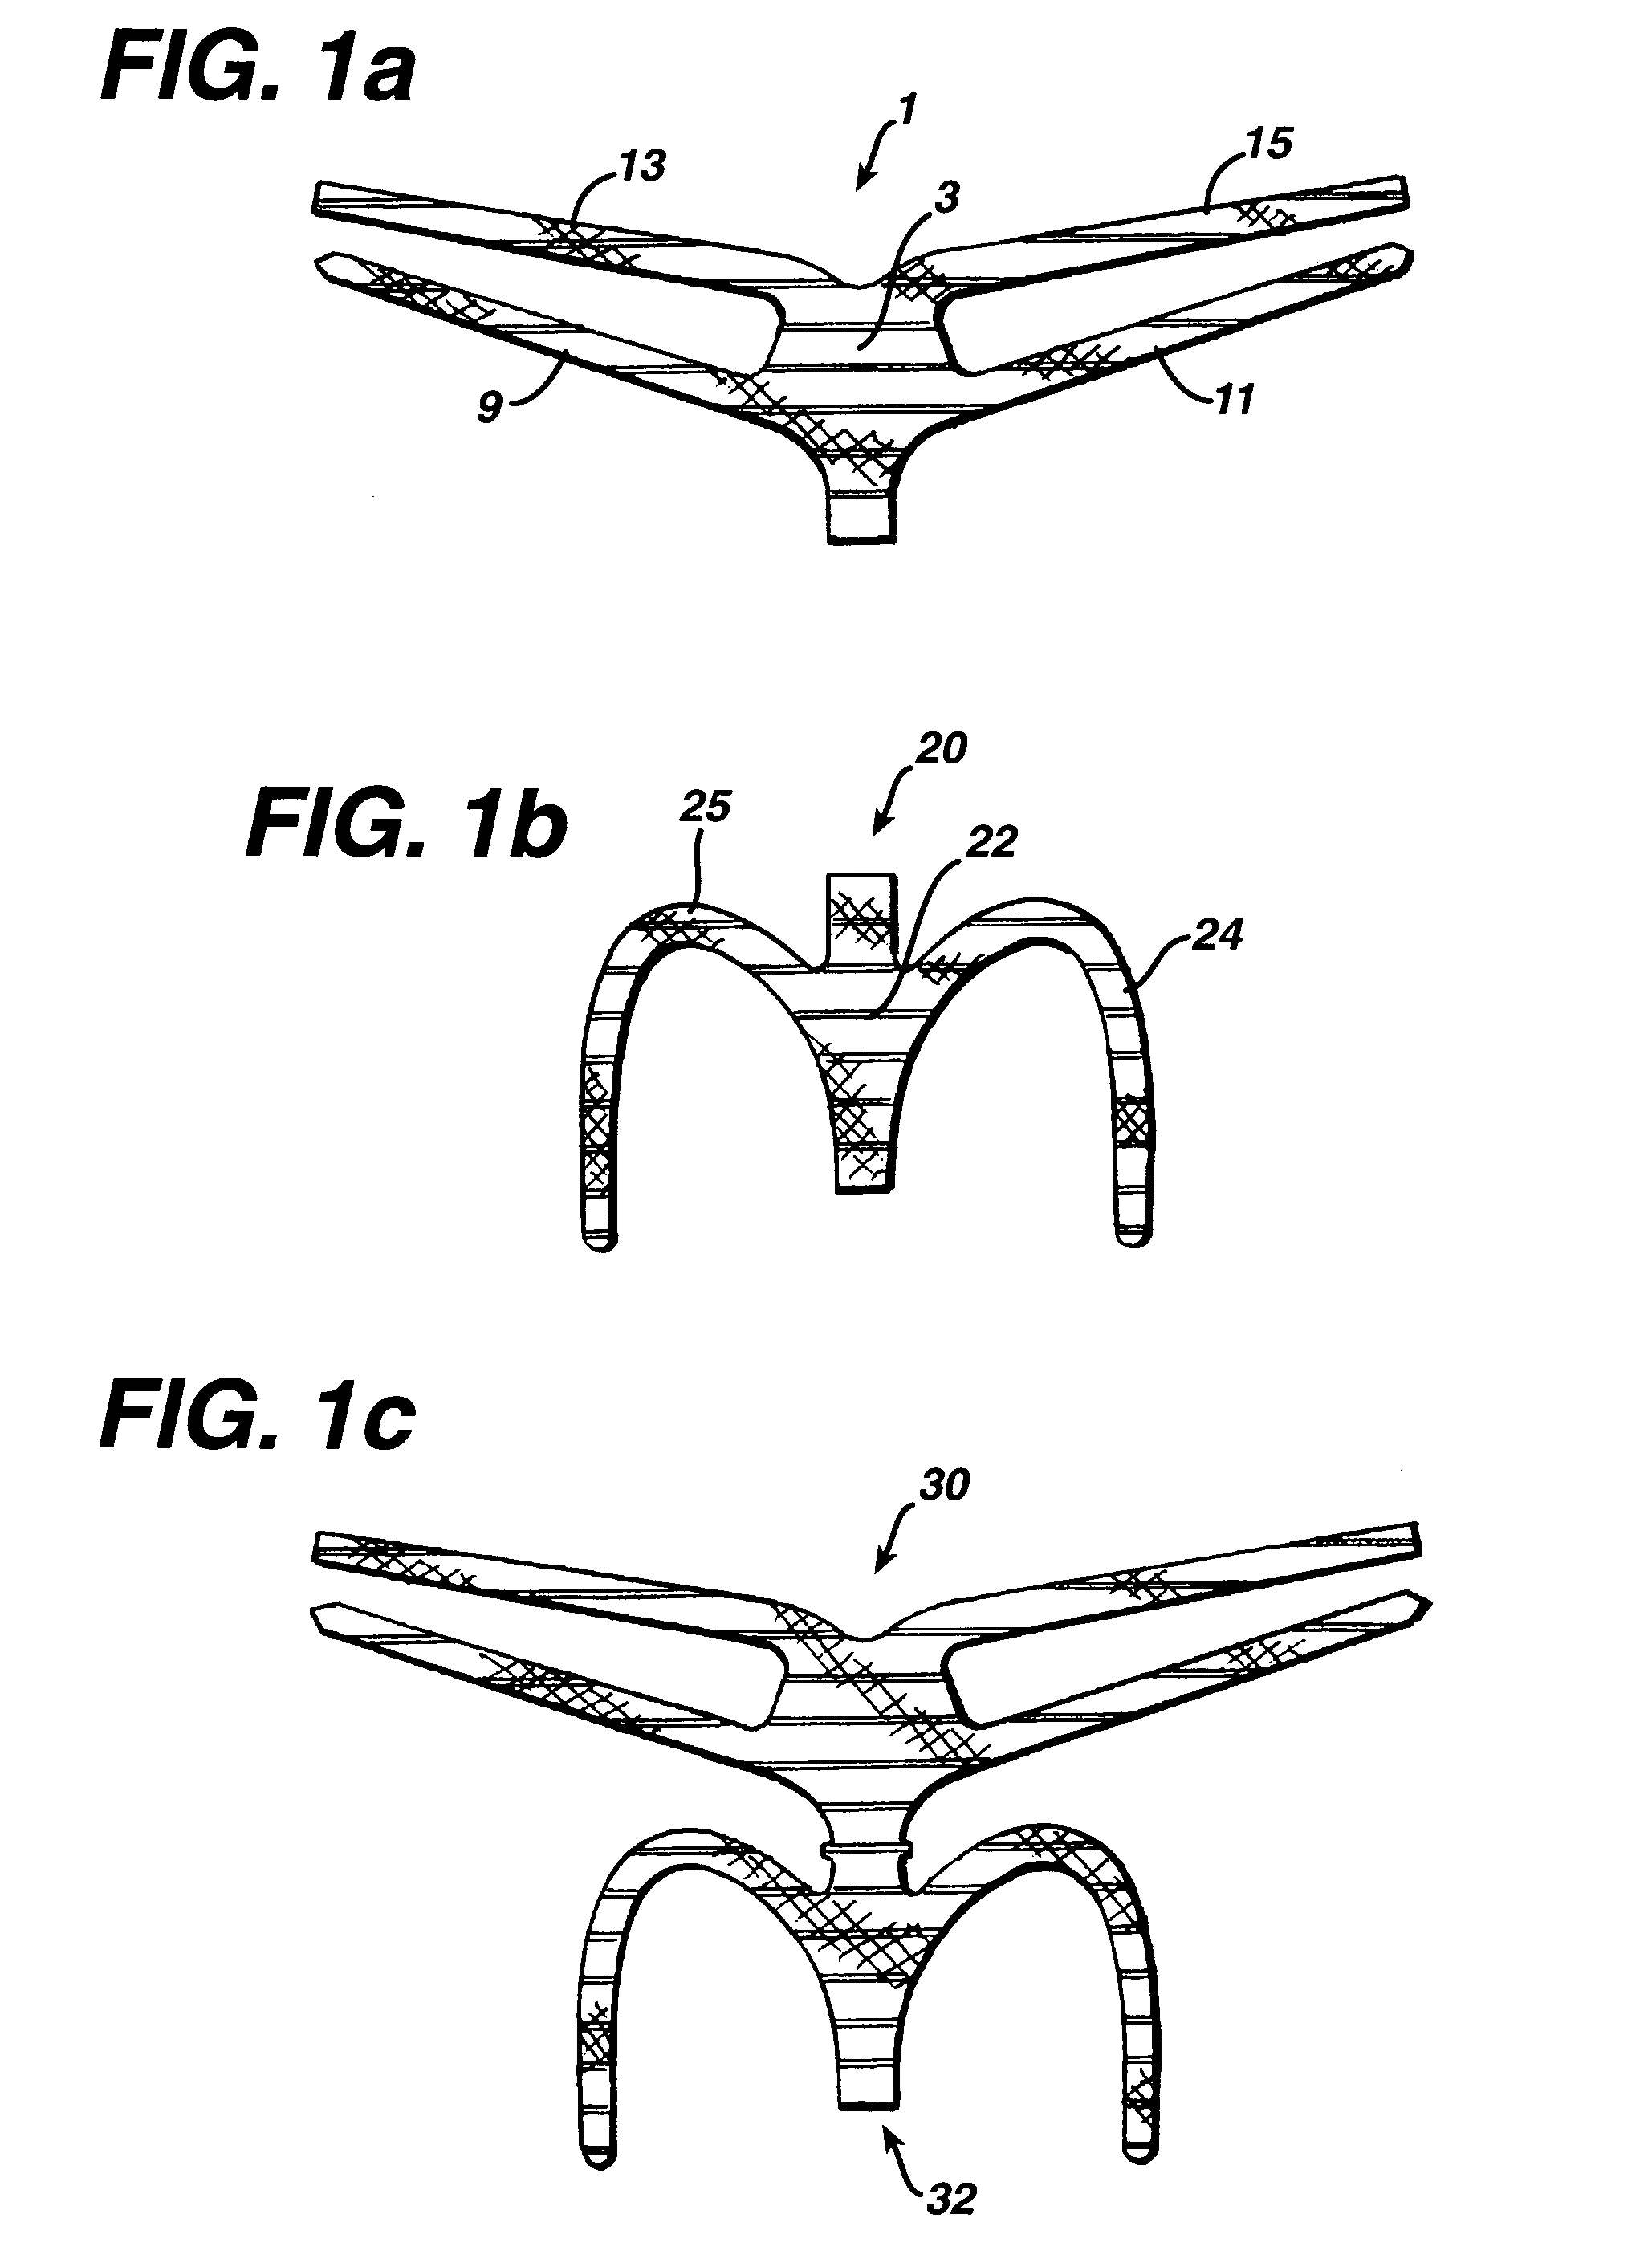 System and method for surgical implant placement